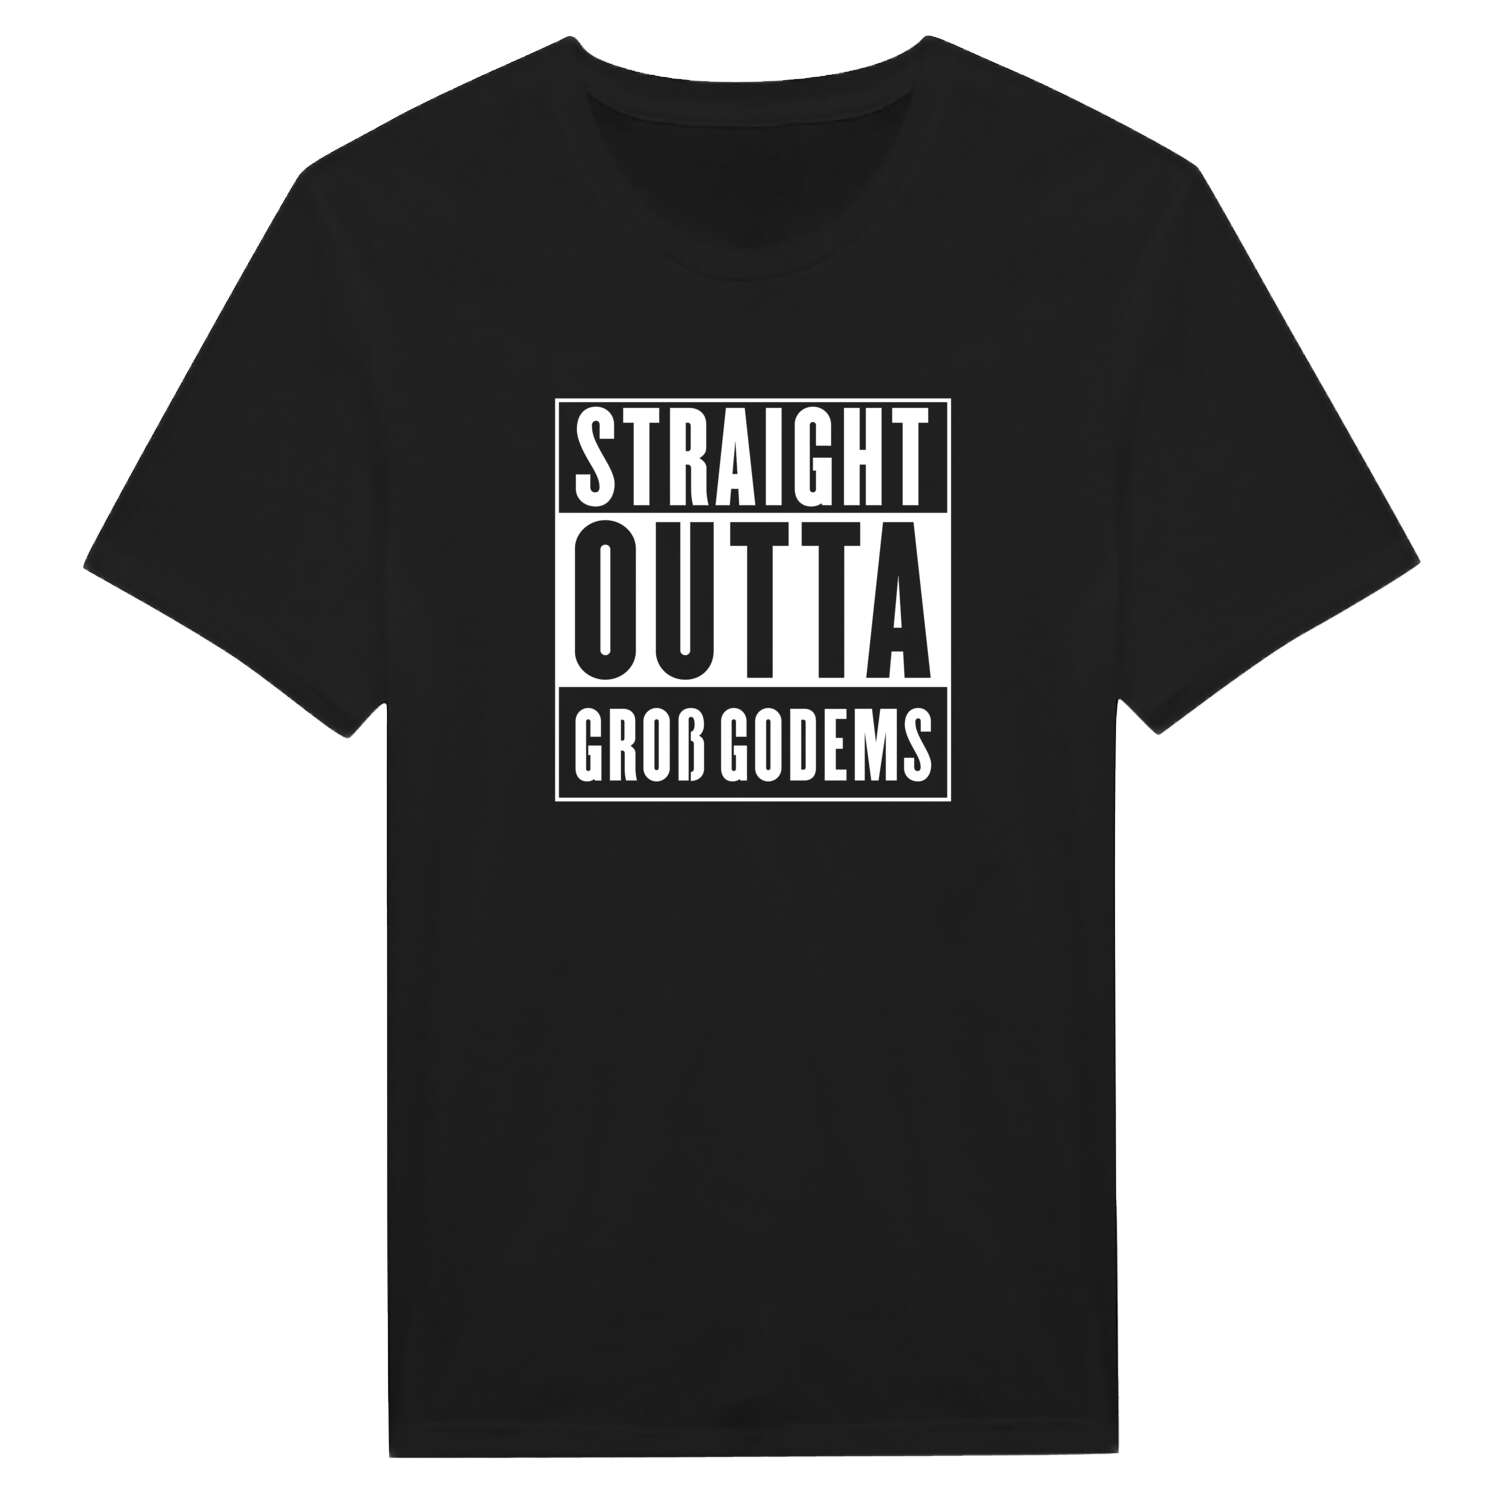 Groß Godems T-Shirt »Straight Outta«